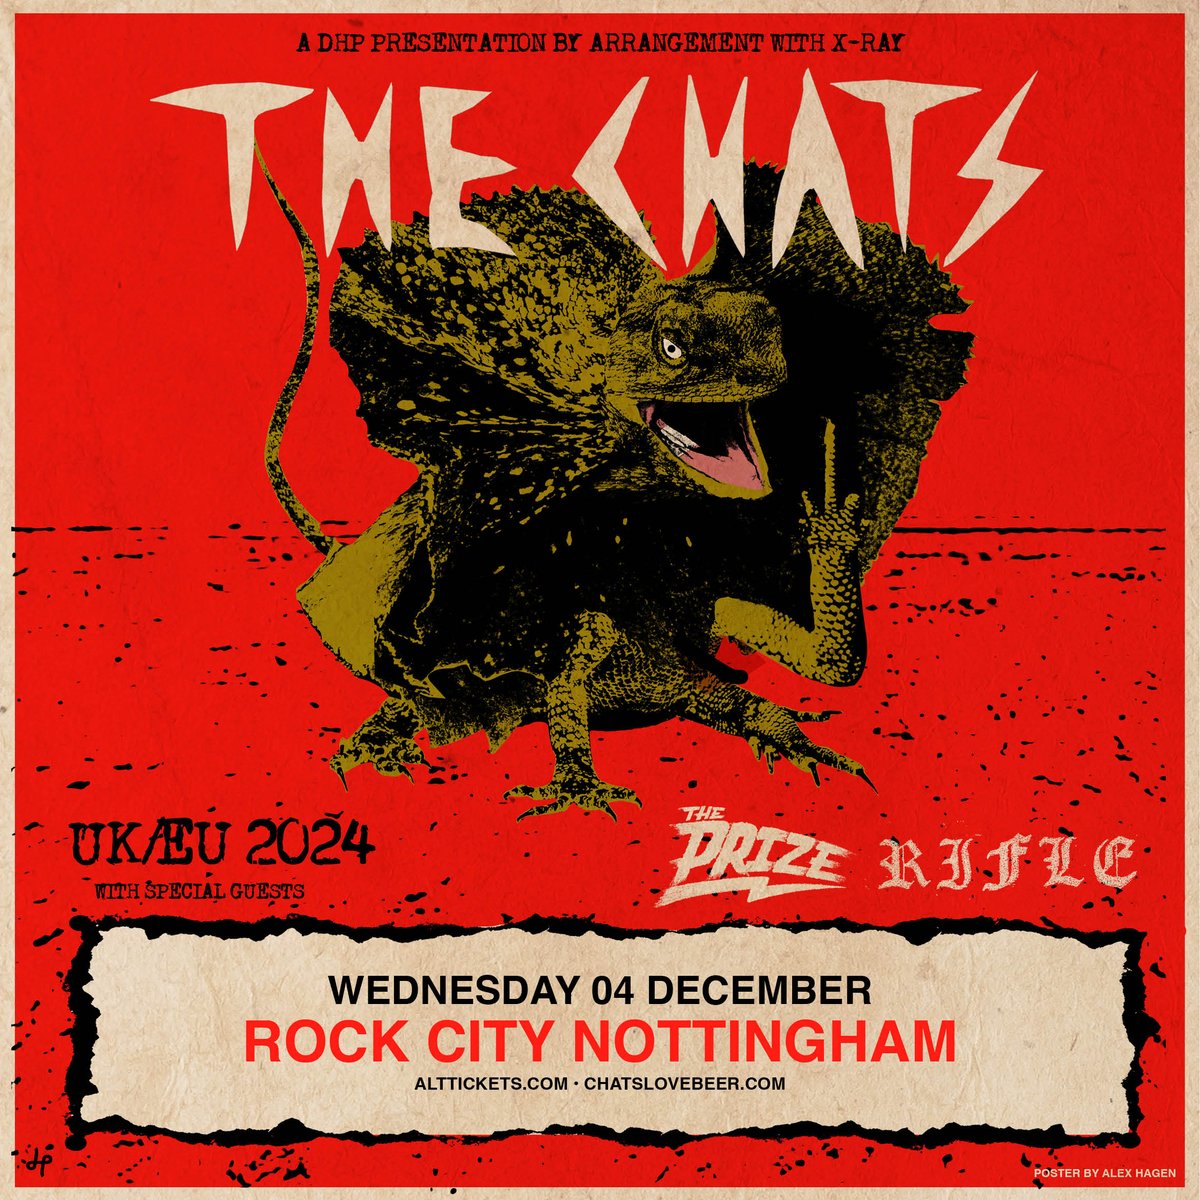 🚨 GIG NEWS 🚨 Connecting popular music with it's roots in rock n roll @thechatsband are an Australian punk-rock gem, playing in December! 🎟️ Presale: live now, check your inbox if you're signed up. 🎟️ General sale: Friday, 10am. Set a reminder 👉 tinyurl.com/46p4vdp2